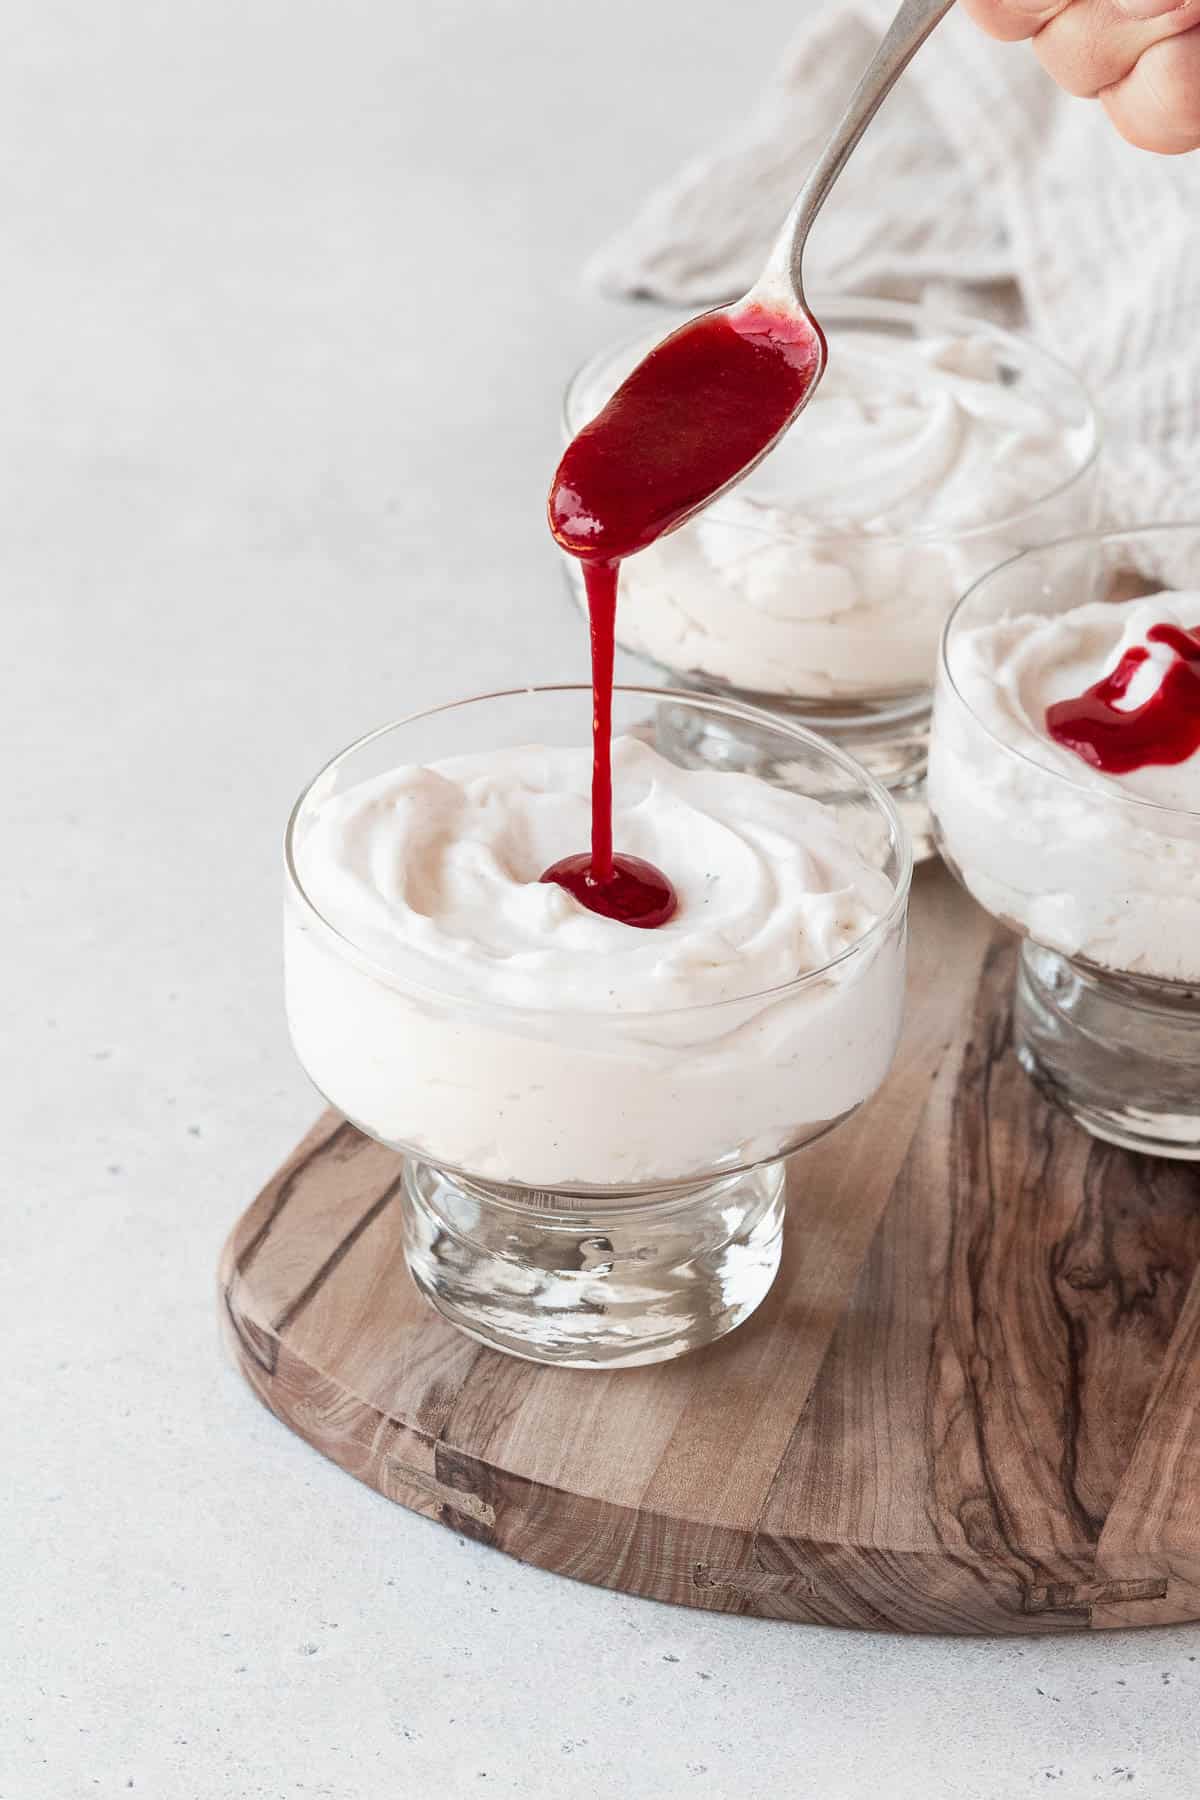 action hero shot of drizzling raspberry coulis onto a serving of French cream cheese mousse.